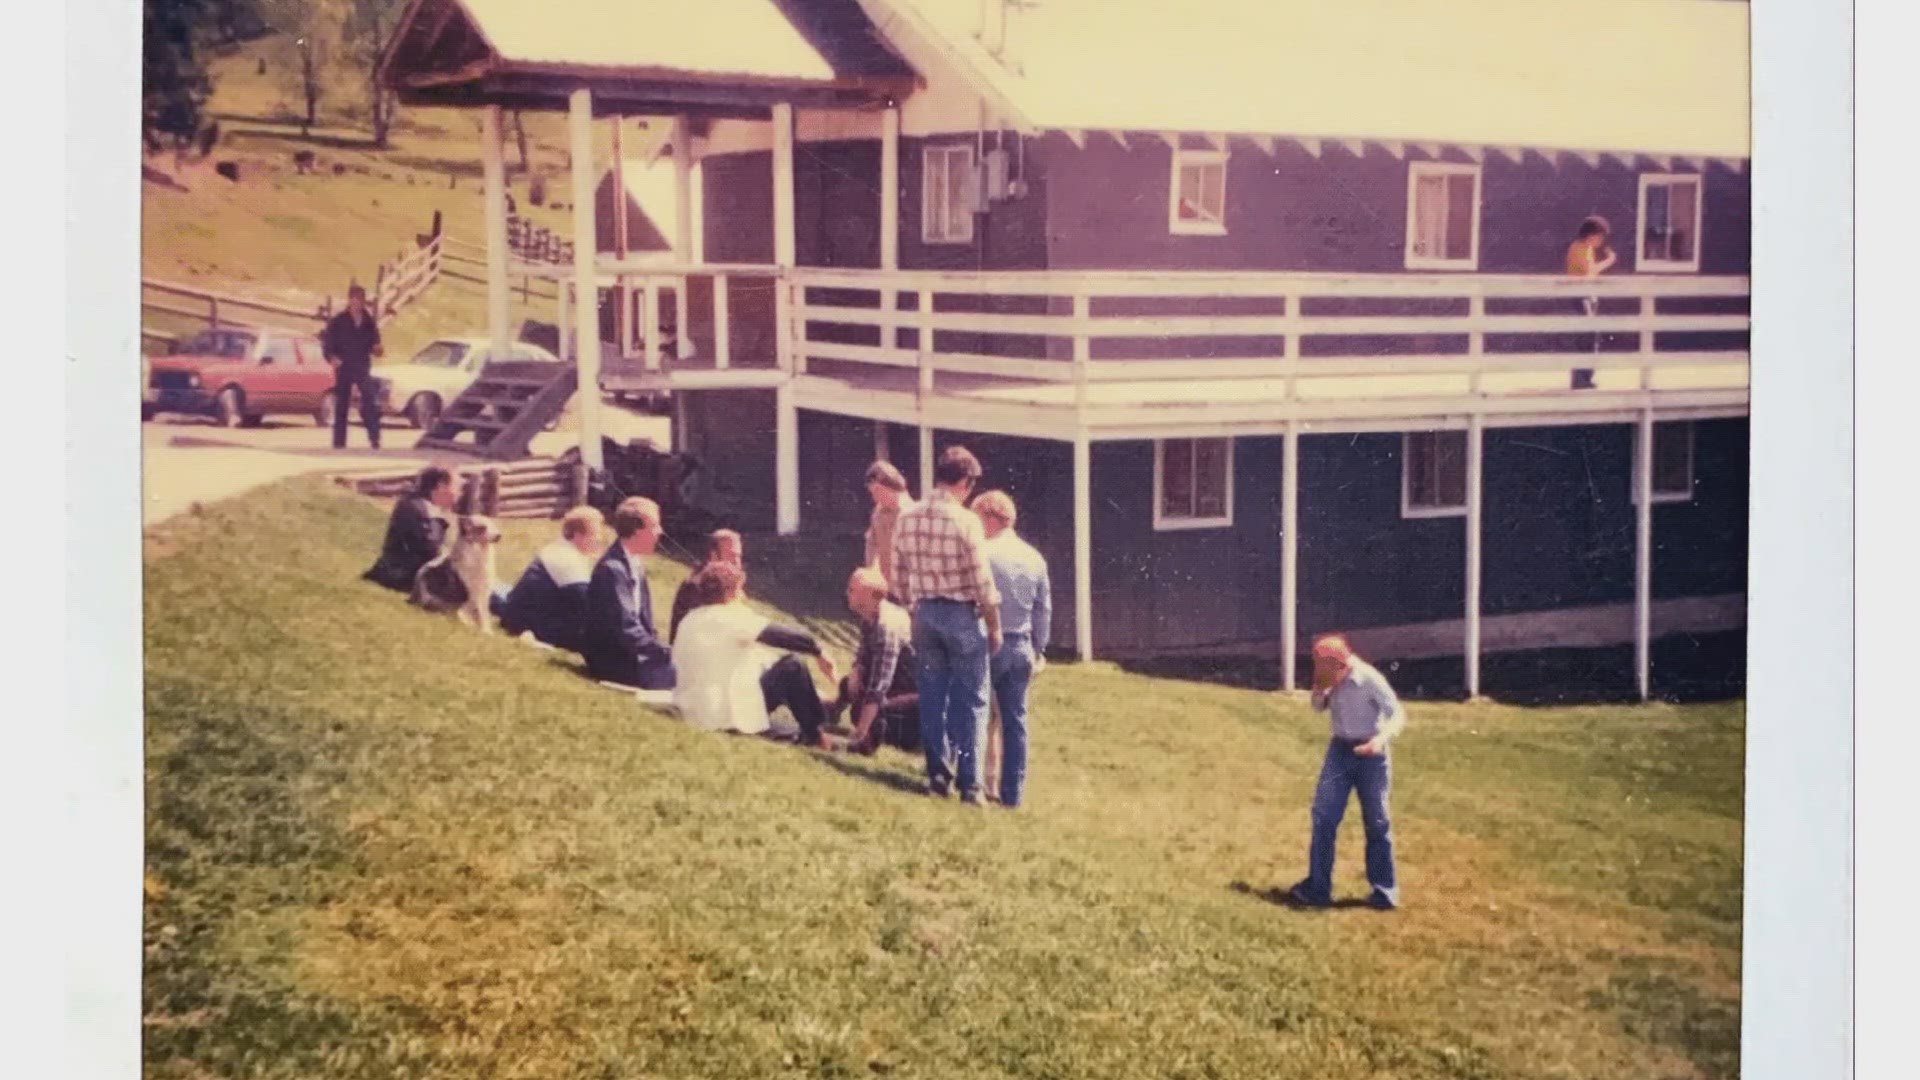 The abuses date back decades in the 1970’s and 1980’s. The ranch was a group foster home for boys north of Spokane in Pend Oreille County.